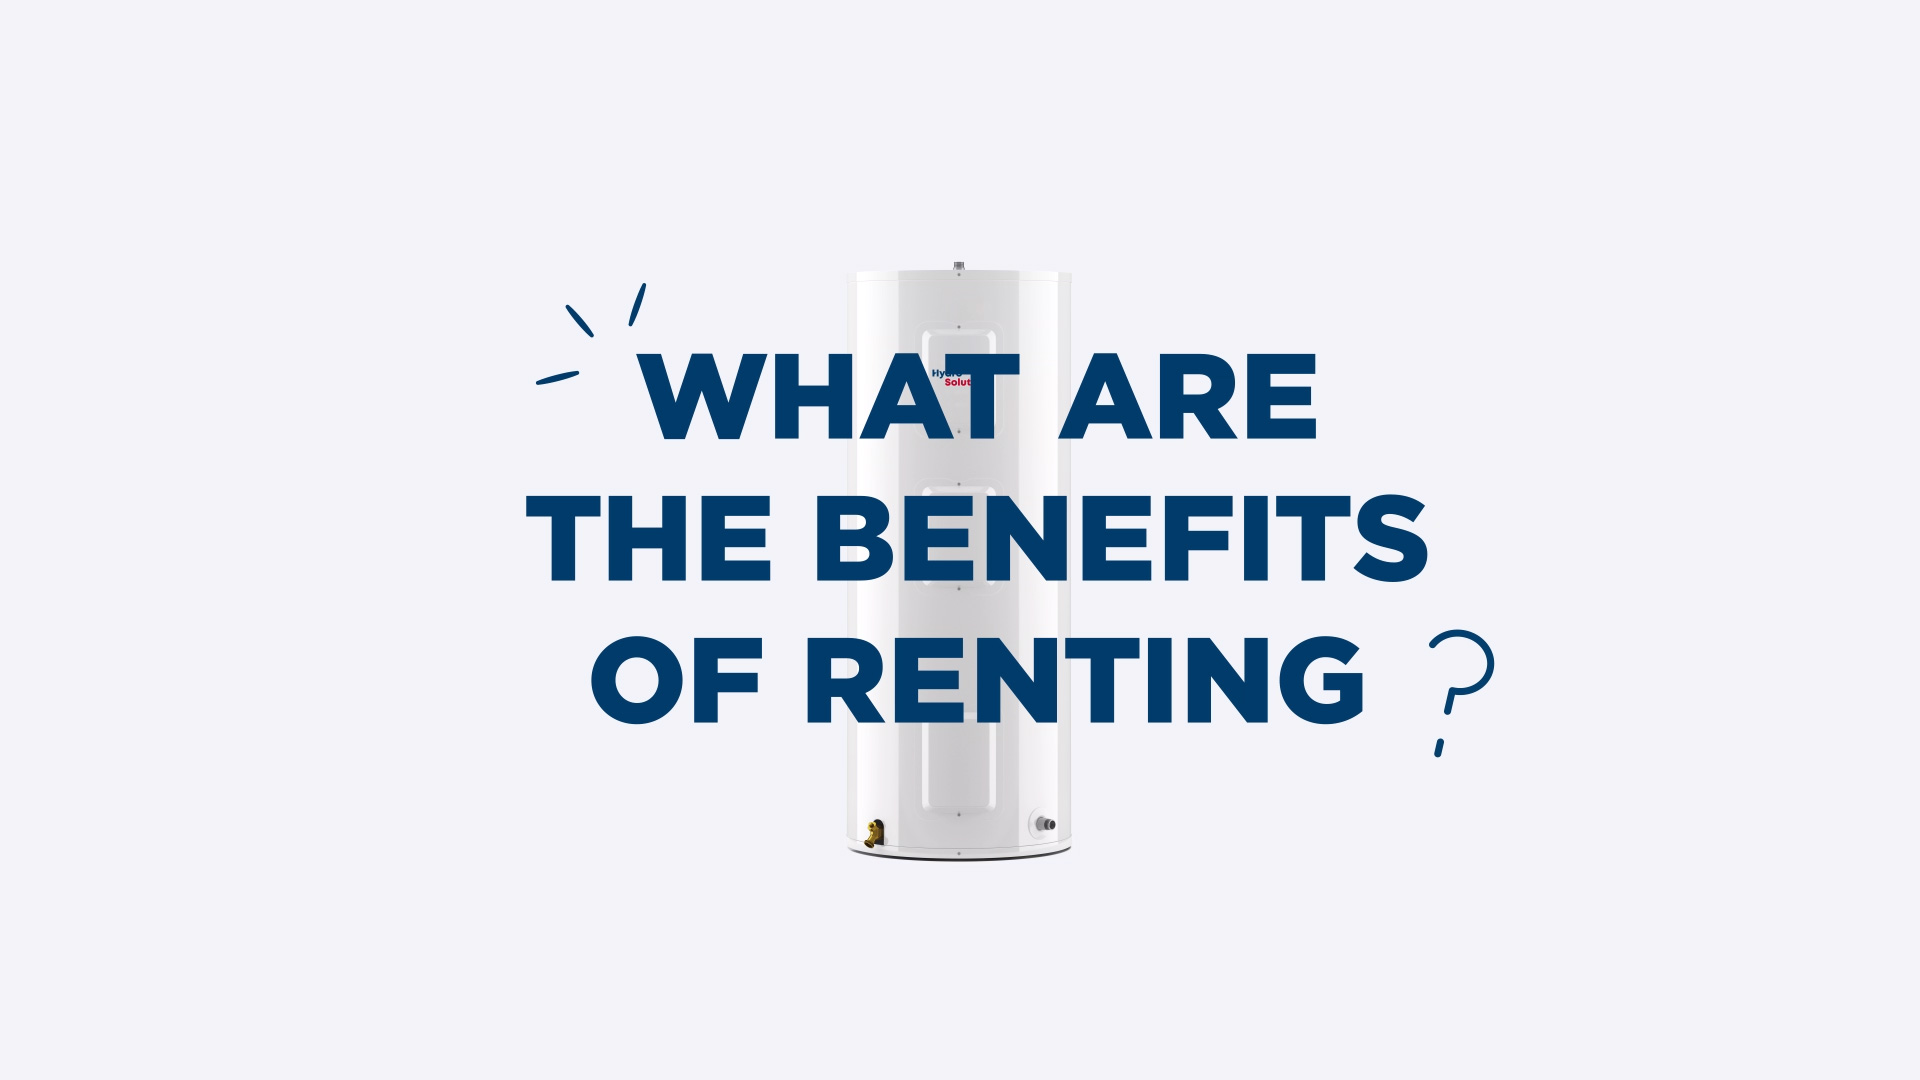 What are the benefits of renting?